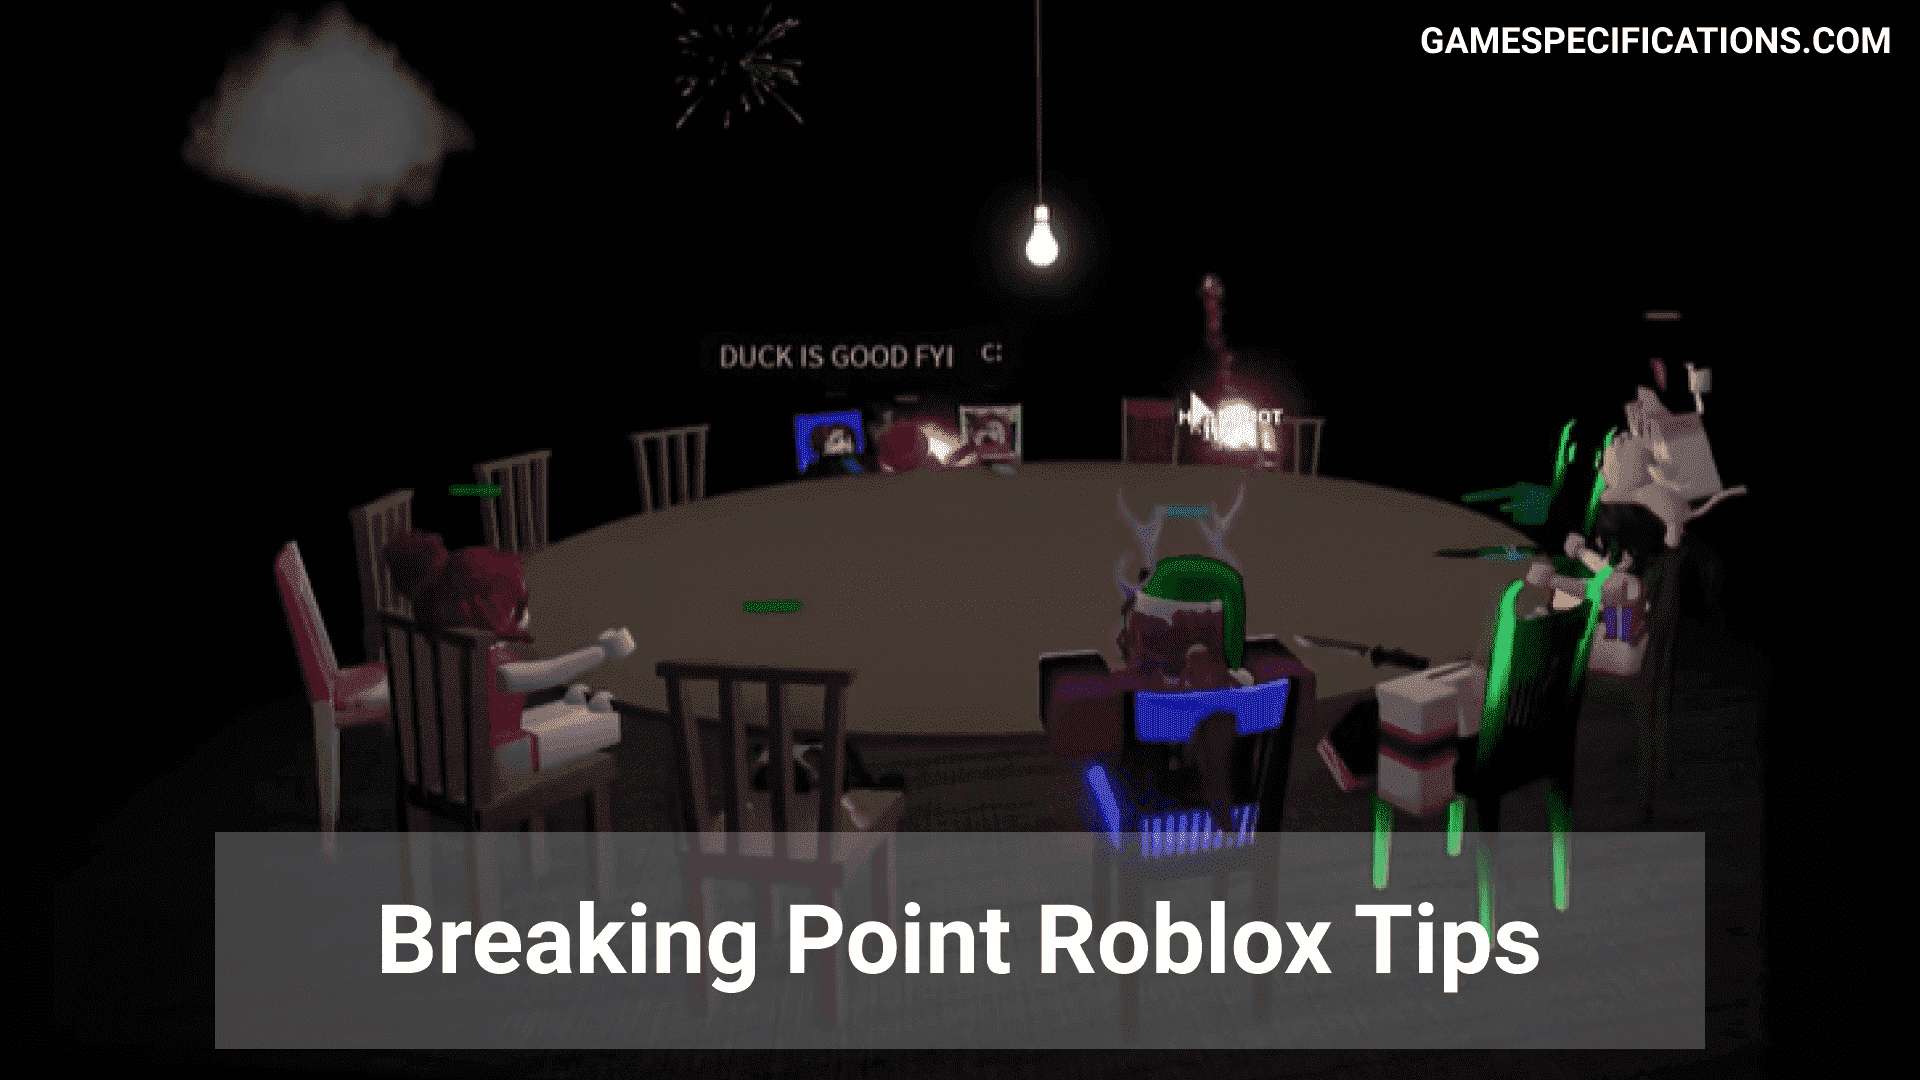 Breaking Point Roblox Guide 11 Tips And Tricks To Secure A Victory Game Specifications - breaking point roblox tips